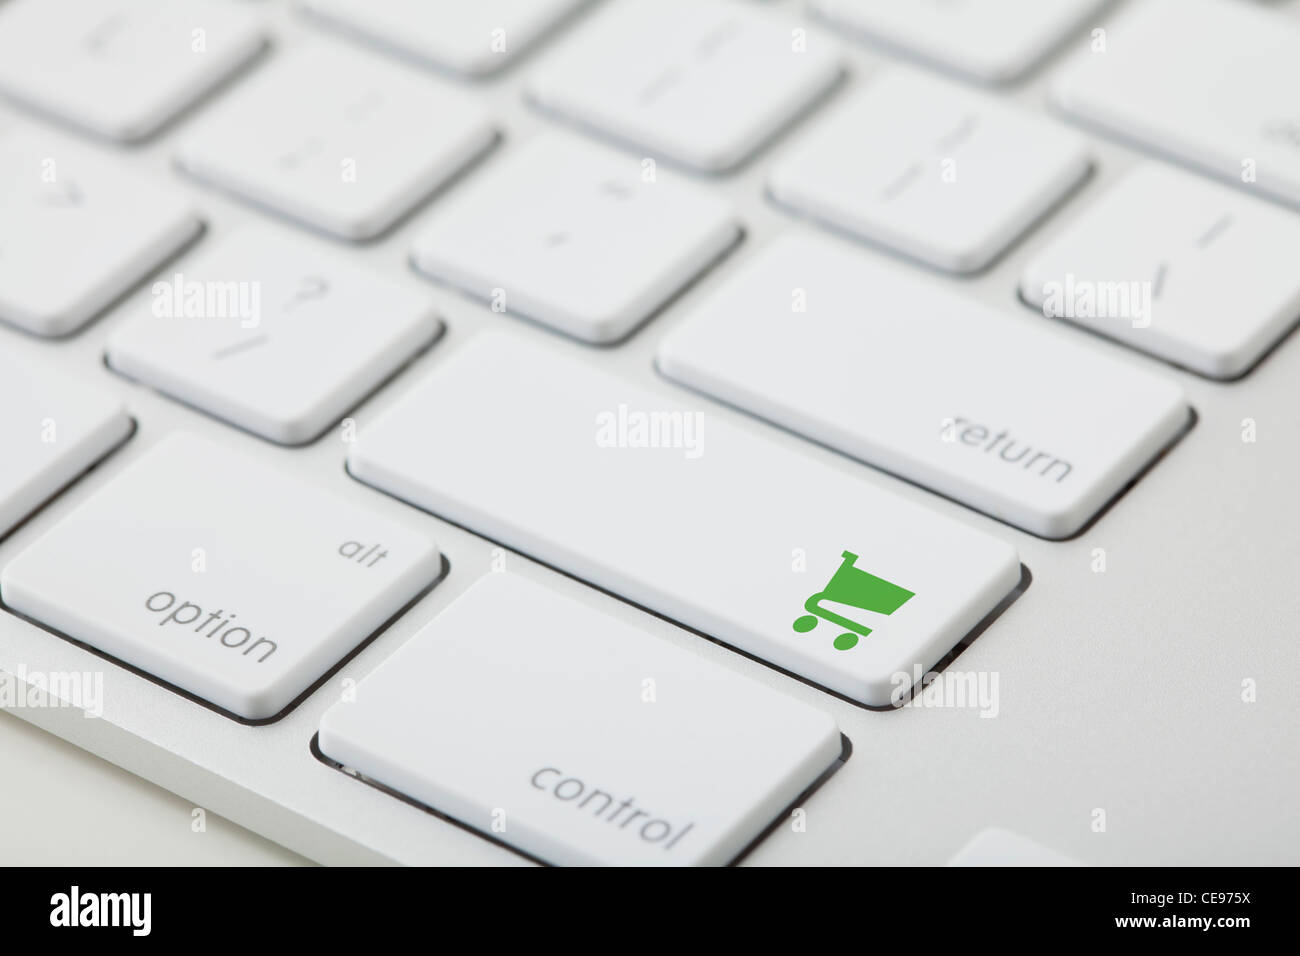 Computer keyboard with shopping cart icon on key Stock Photo